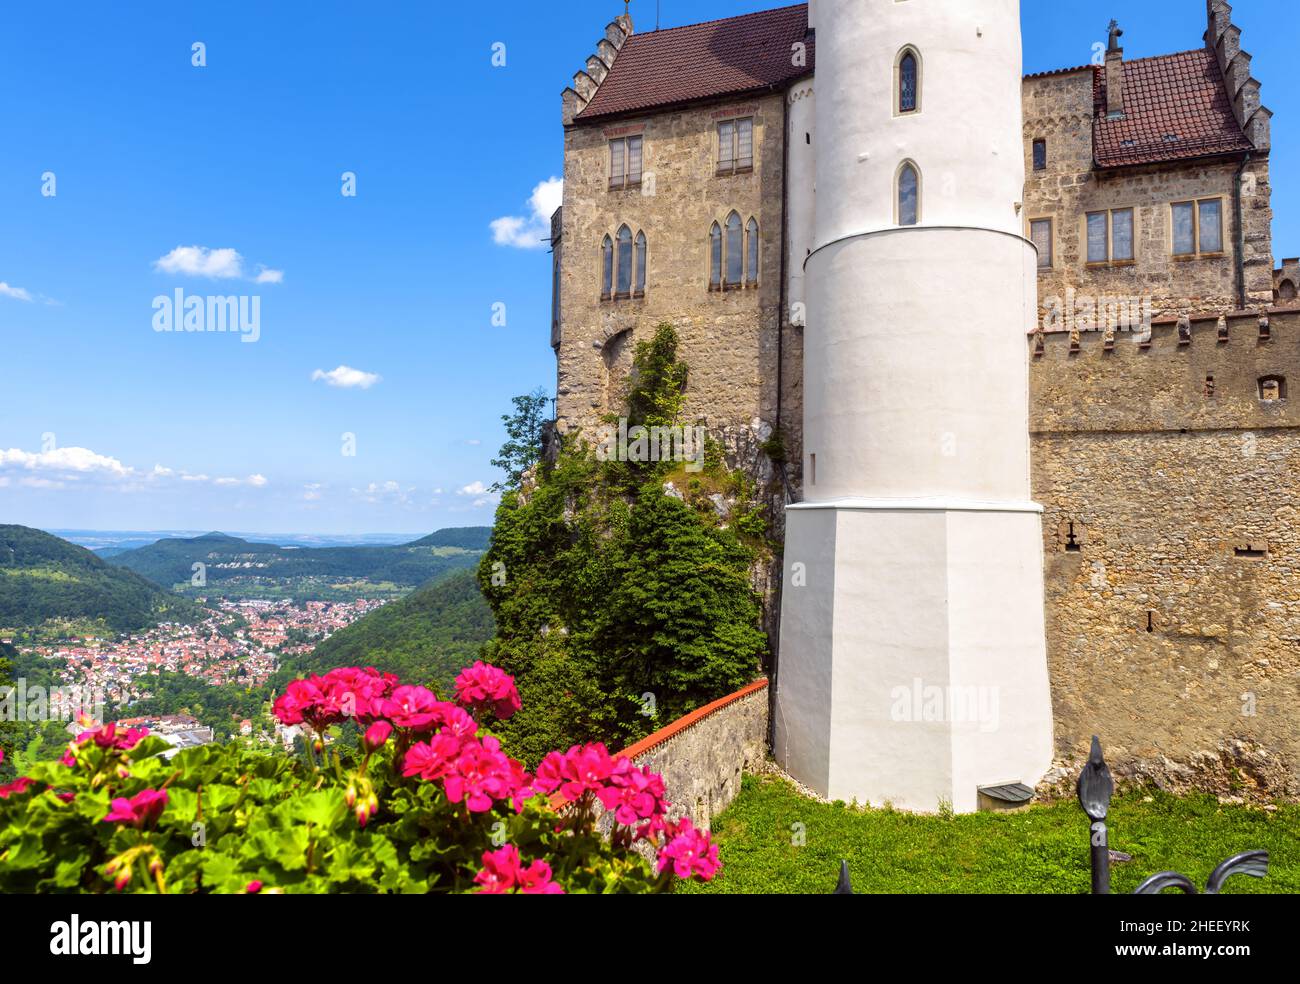 Lichtenstein Castle overlooking city, Germany, Europe. This castle on mountain top is landmark of Schwarzwald, Baden-Wurttemberg. Scenic view of old h Stock Photo